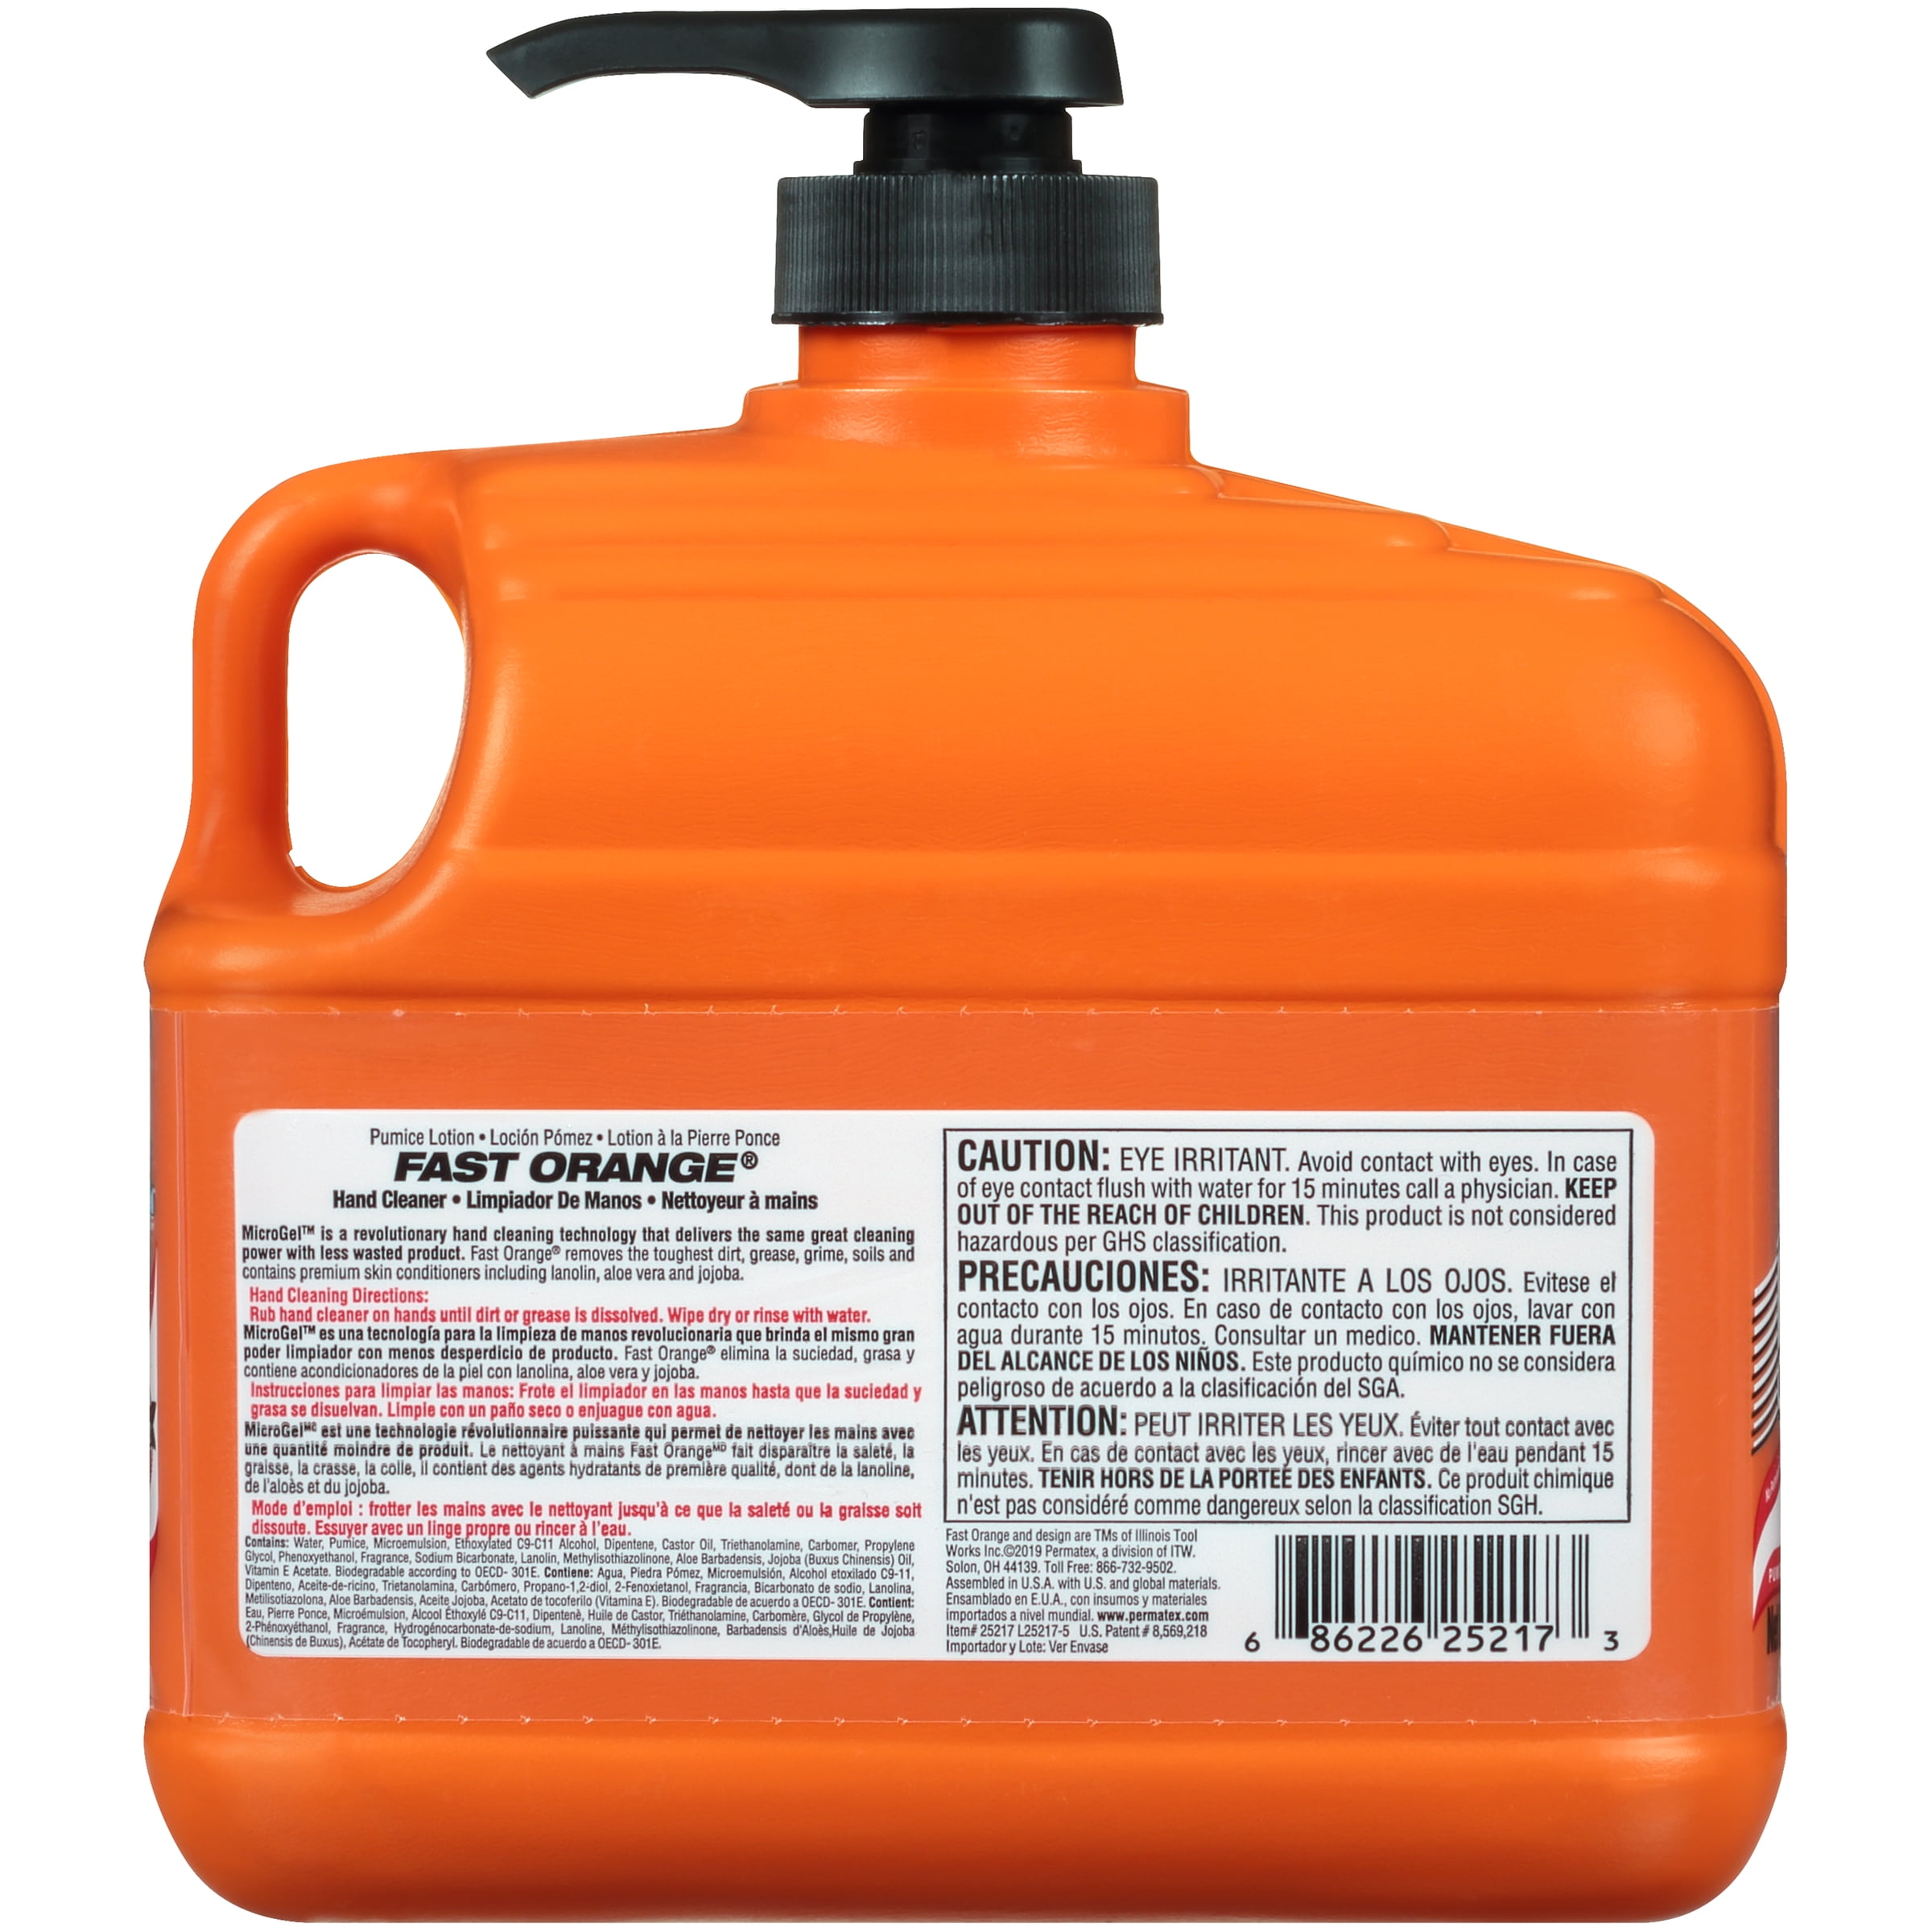 Fast Orange Pumice Lotion, Heavy Duty Hand Cleaner, Natural Citrus Scent,  Waterless Cleaner For Mechanics, Strong Grease Fighter, 1/2 Gallon - 25217